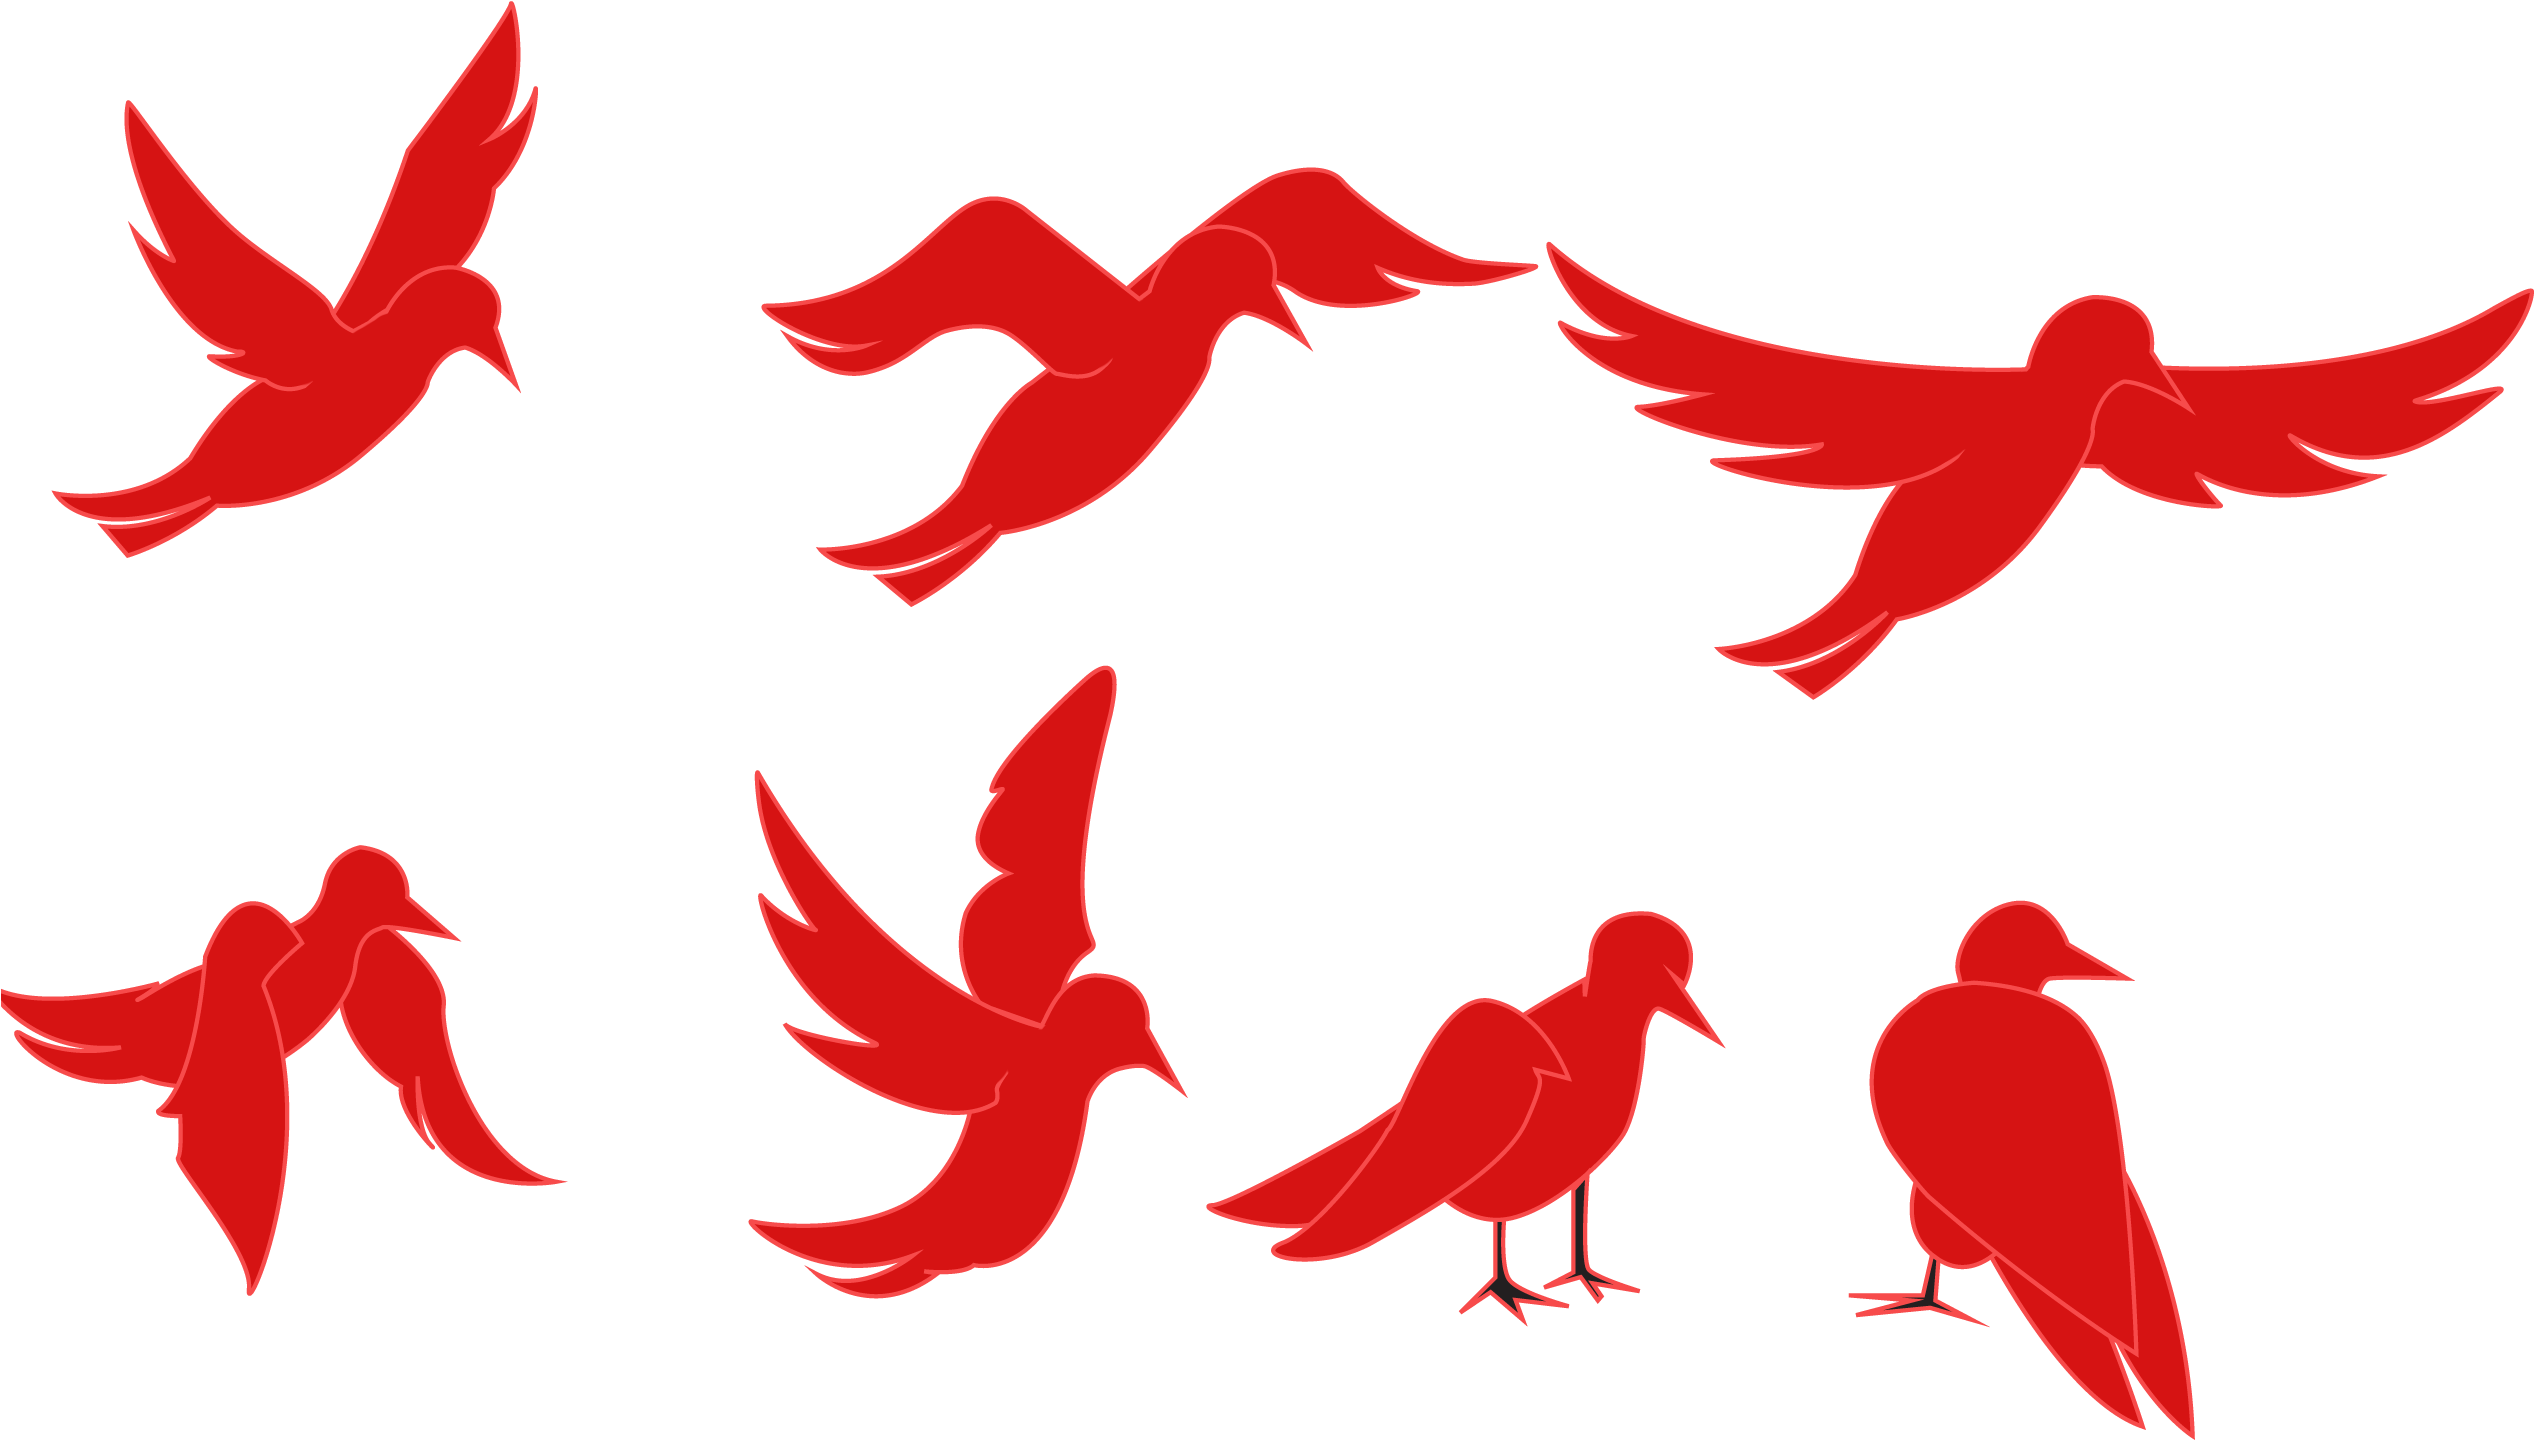 Download Animation Of A Silhouette Of A Bird On A White Background - Red Bird  Flying Png PNG Image with No Background 